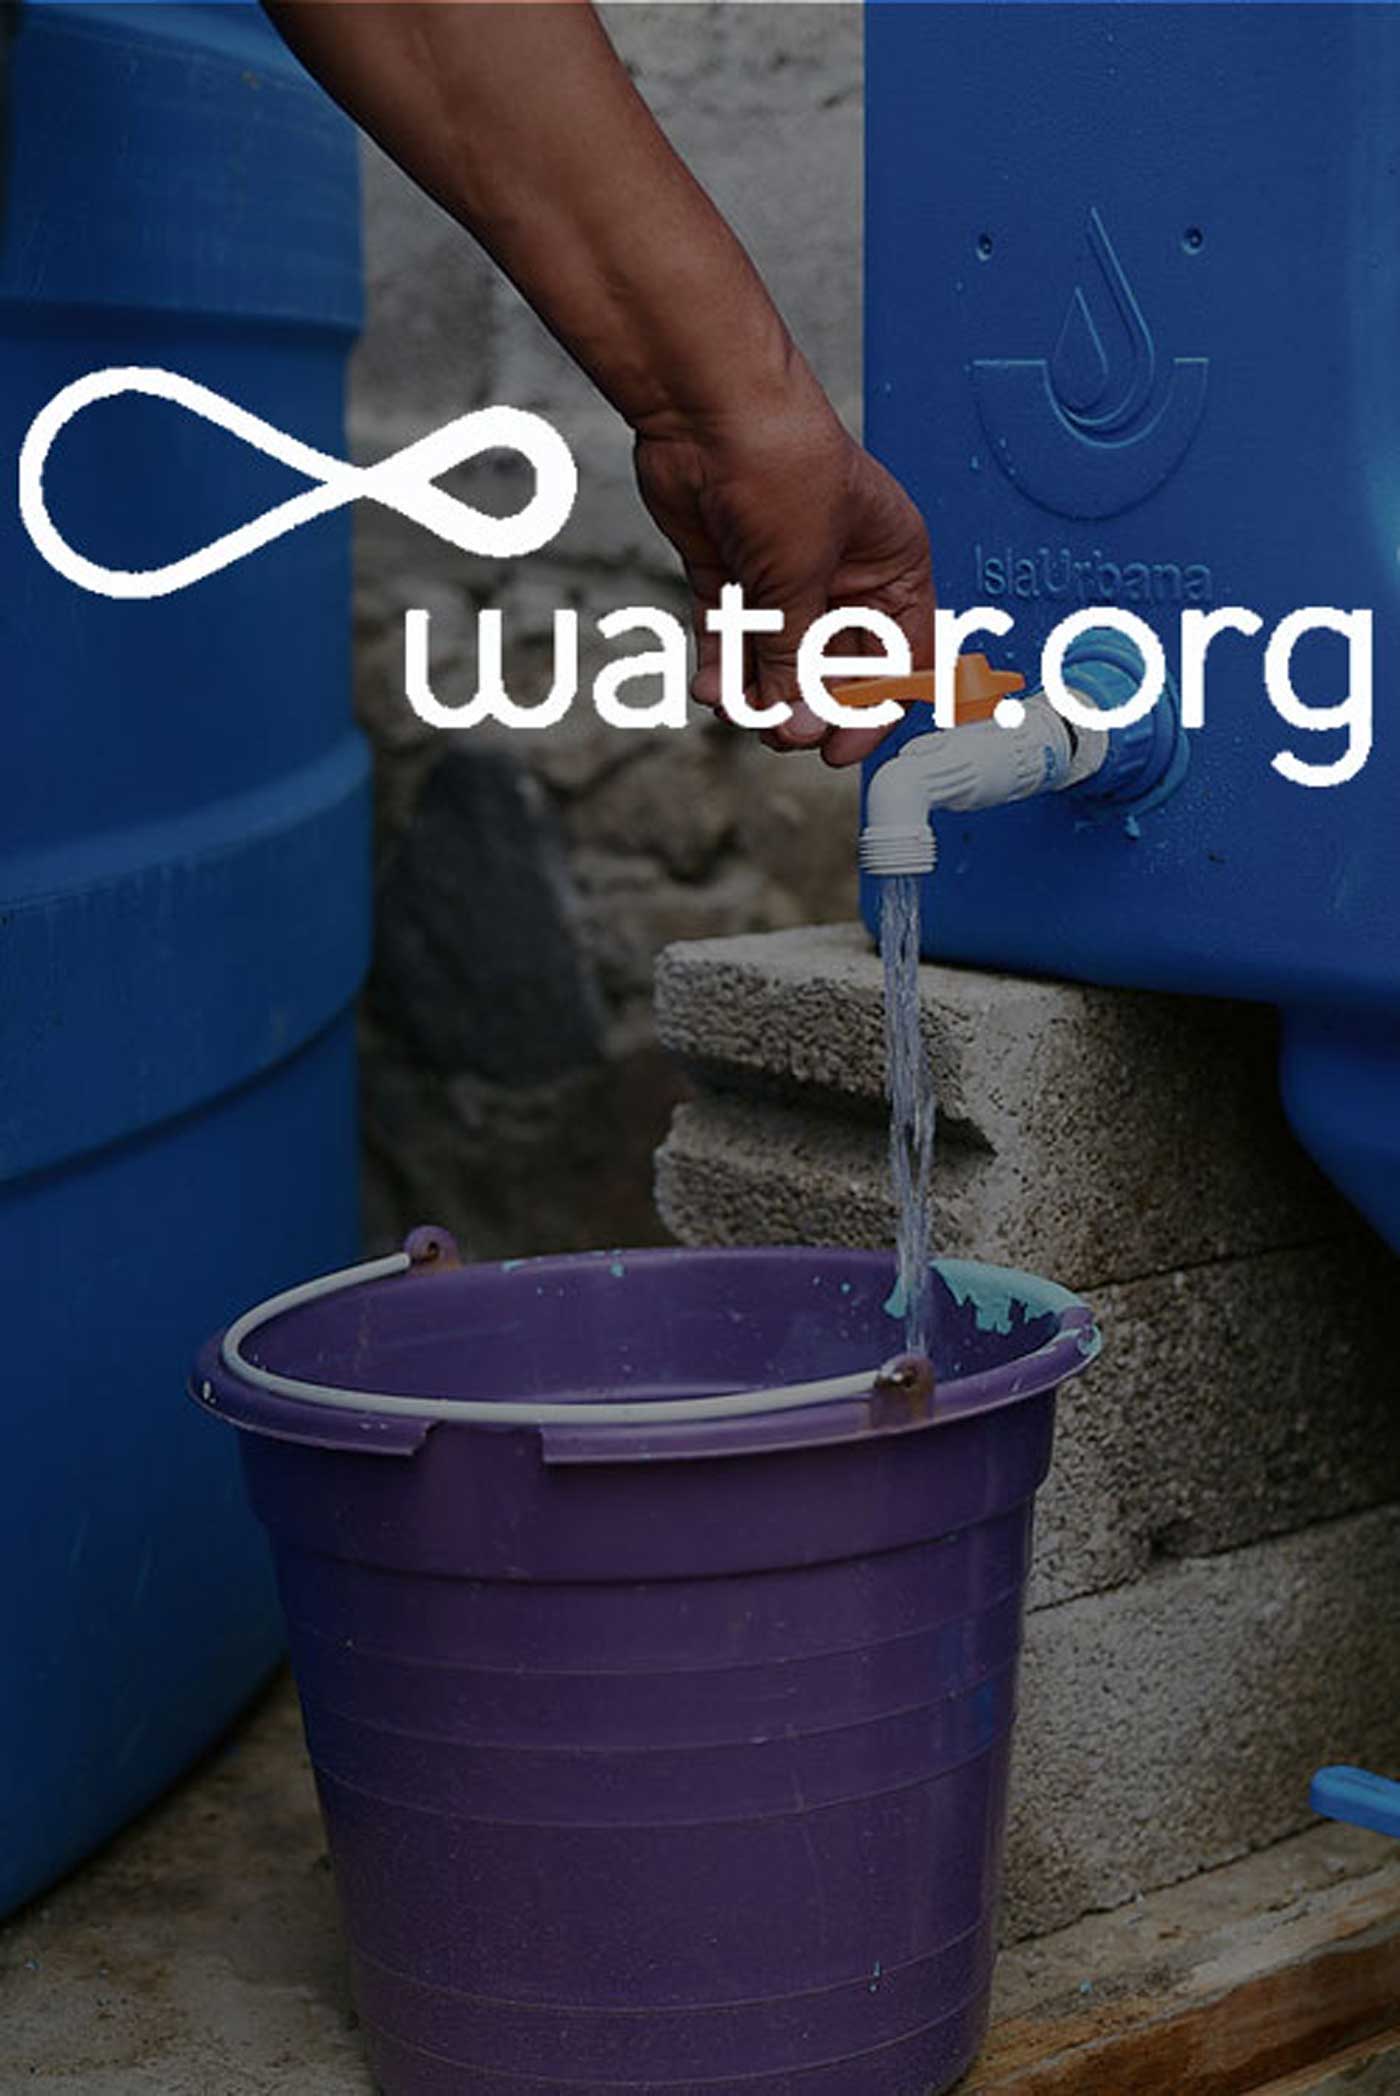 Water pours into a bucket. The Water.org logo overlays on top of the image.